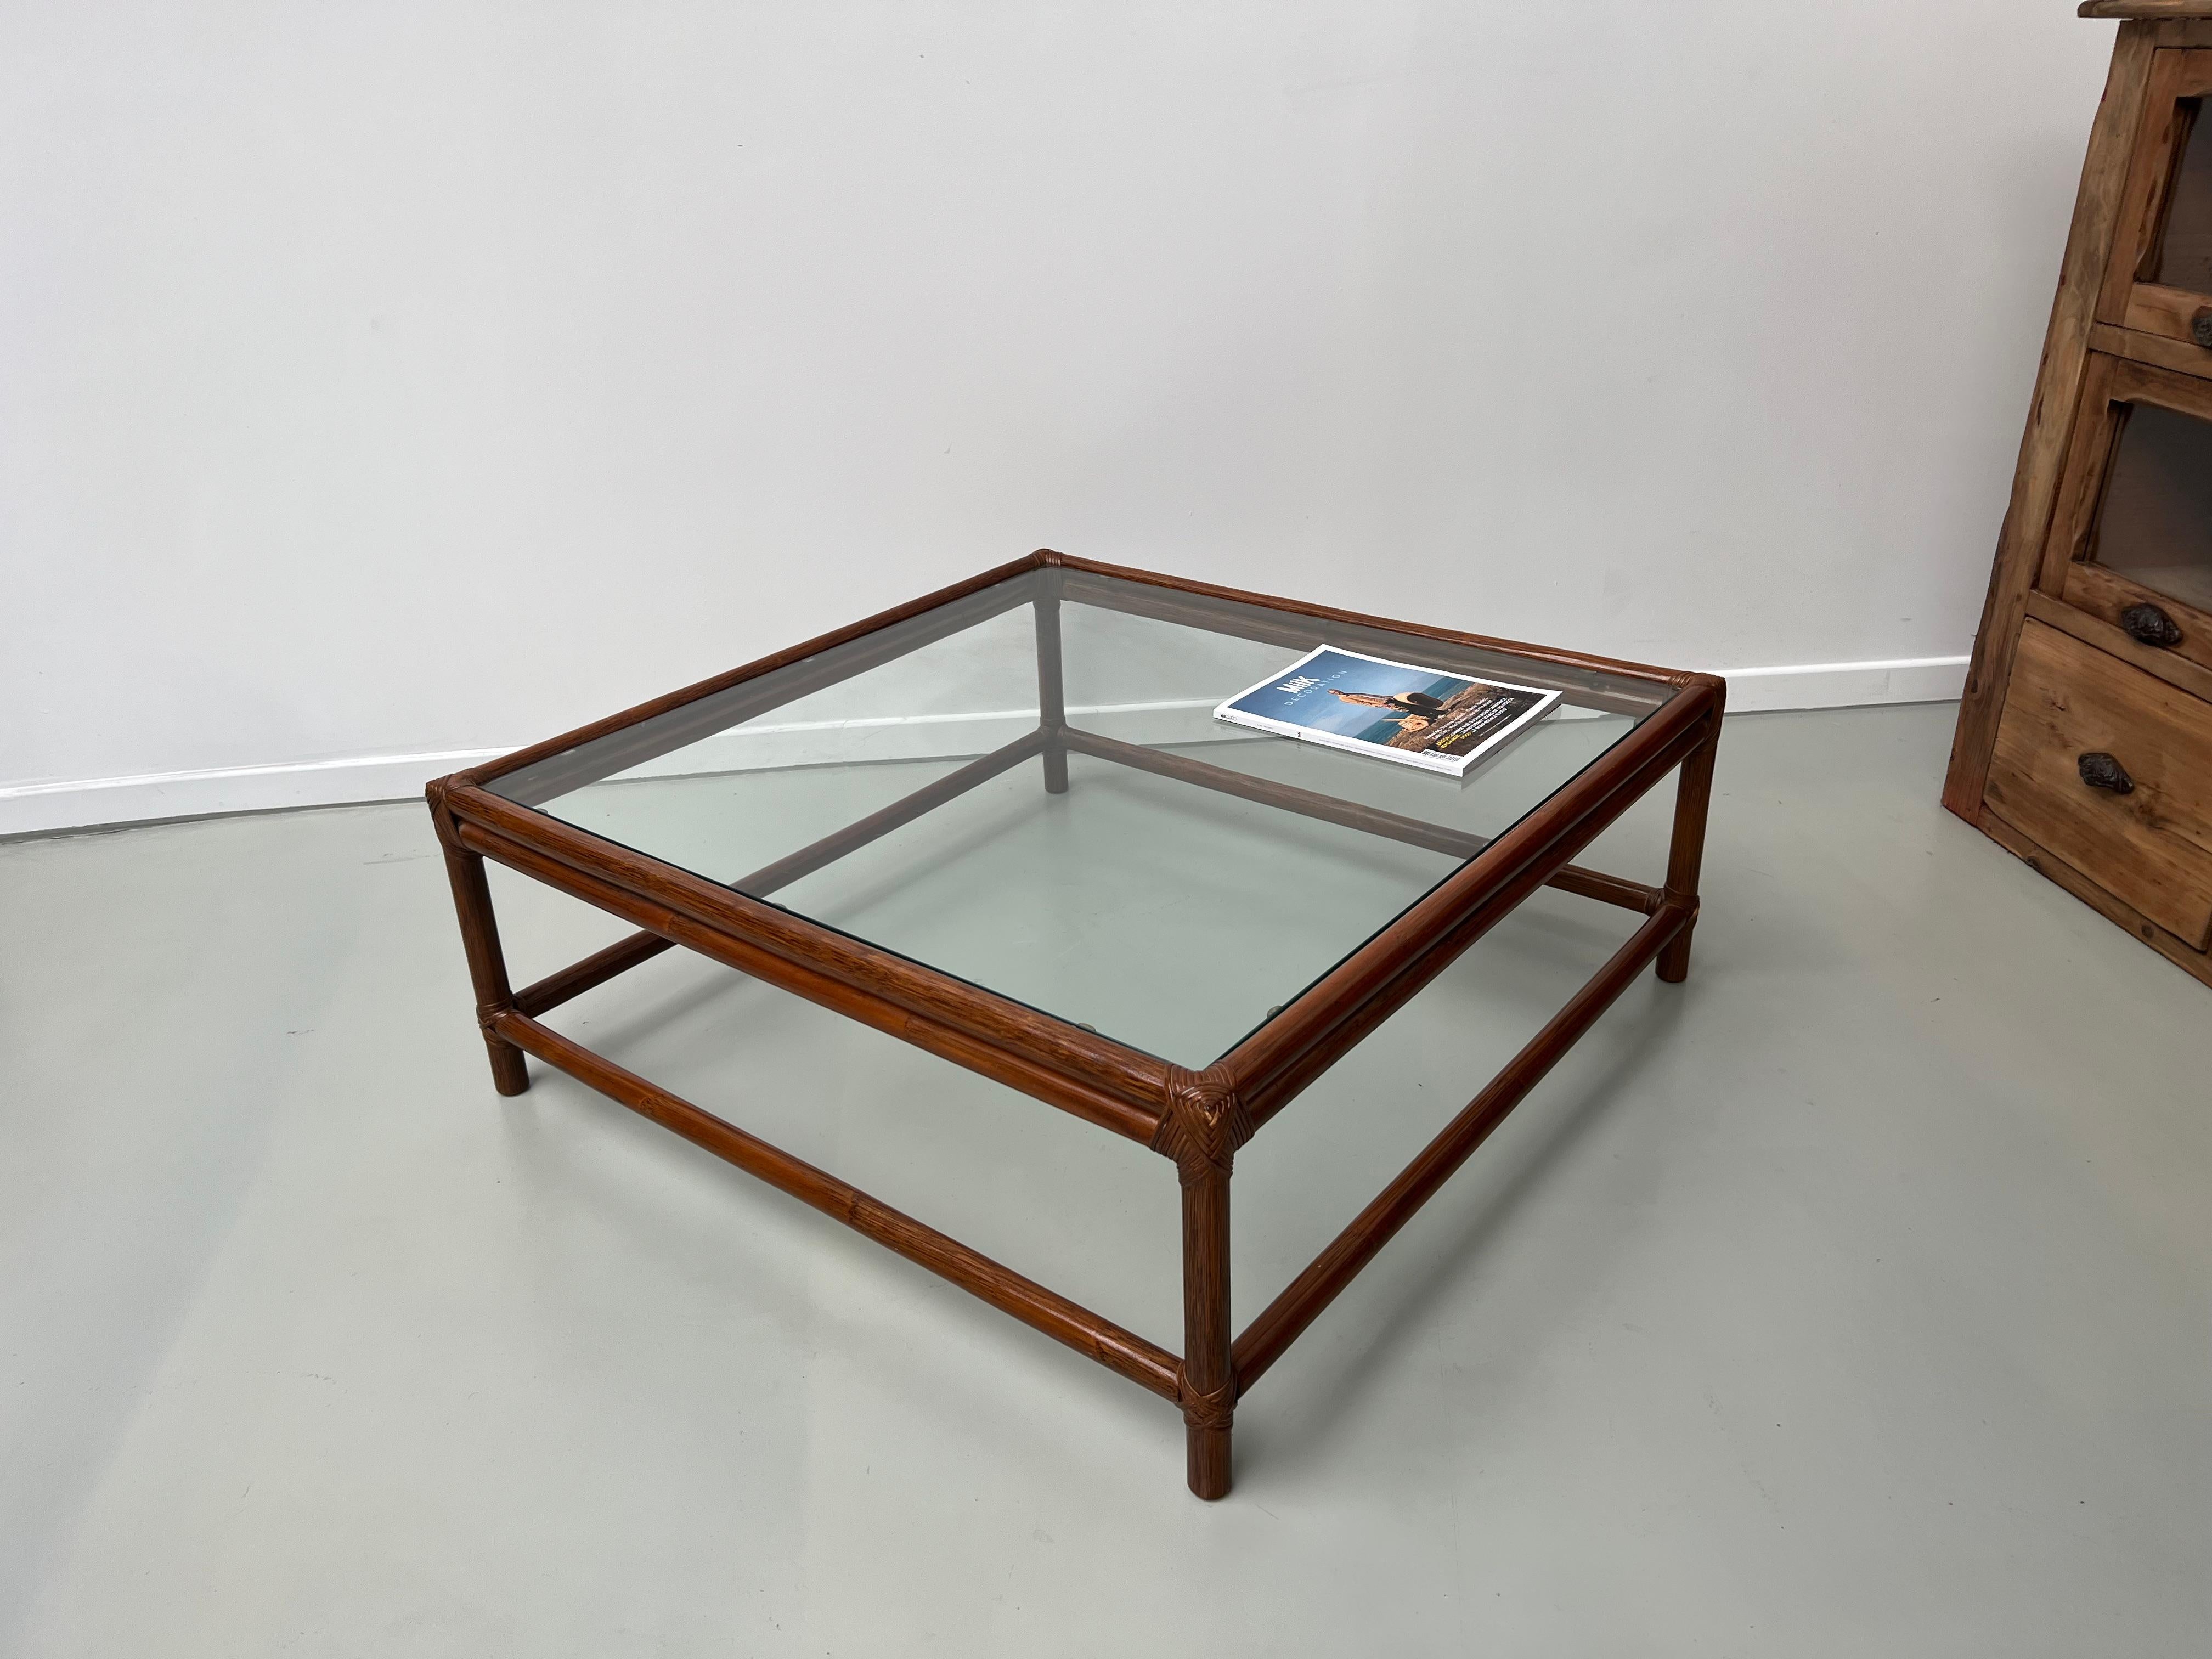 Large Artisanal French Coffee Table in Rattan and Glass, circa 1970 For Sale 13